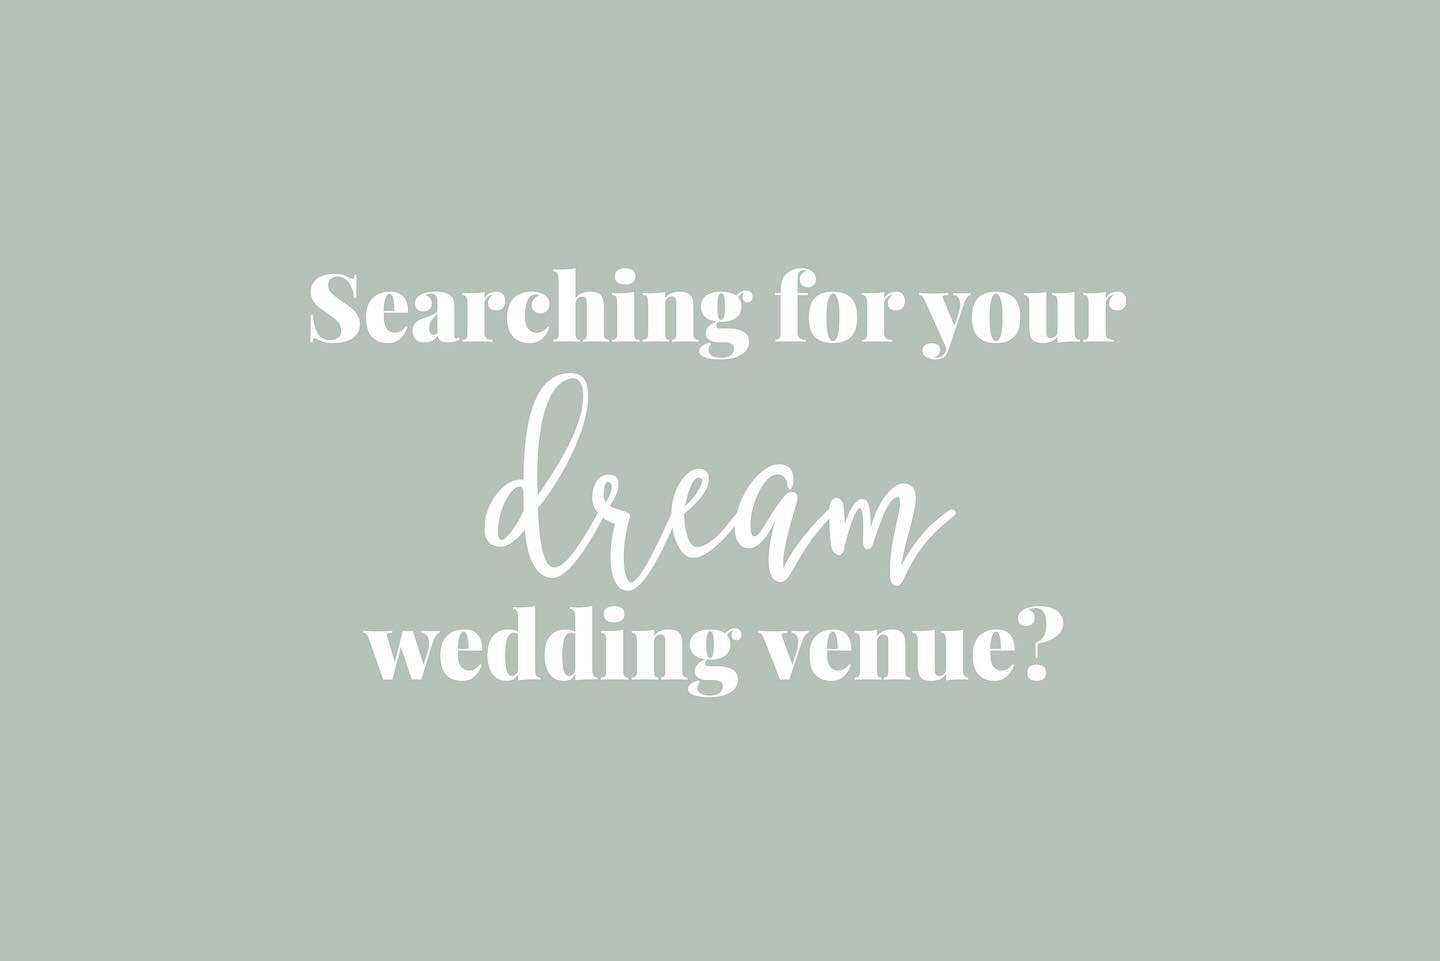 Searching for your dream wedding venue? Join us this Sunday at @theploughatleigh for their Wedding Open Day! Sunday 19th May, 11am - 4pm 🌟

Explore the charming barn, rustic pub, and picturesque country garden. Whether you&rsquo;re dreaming of a bar